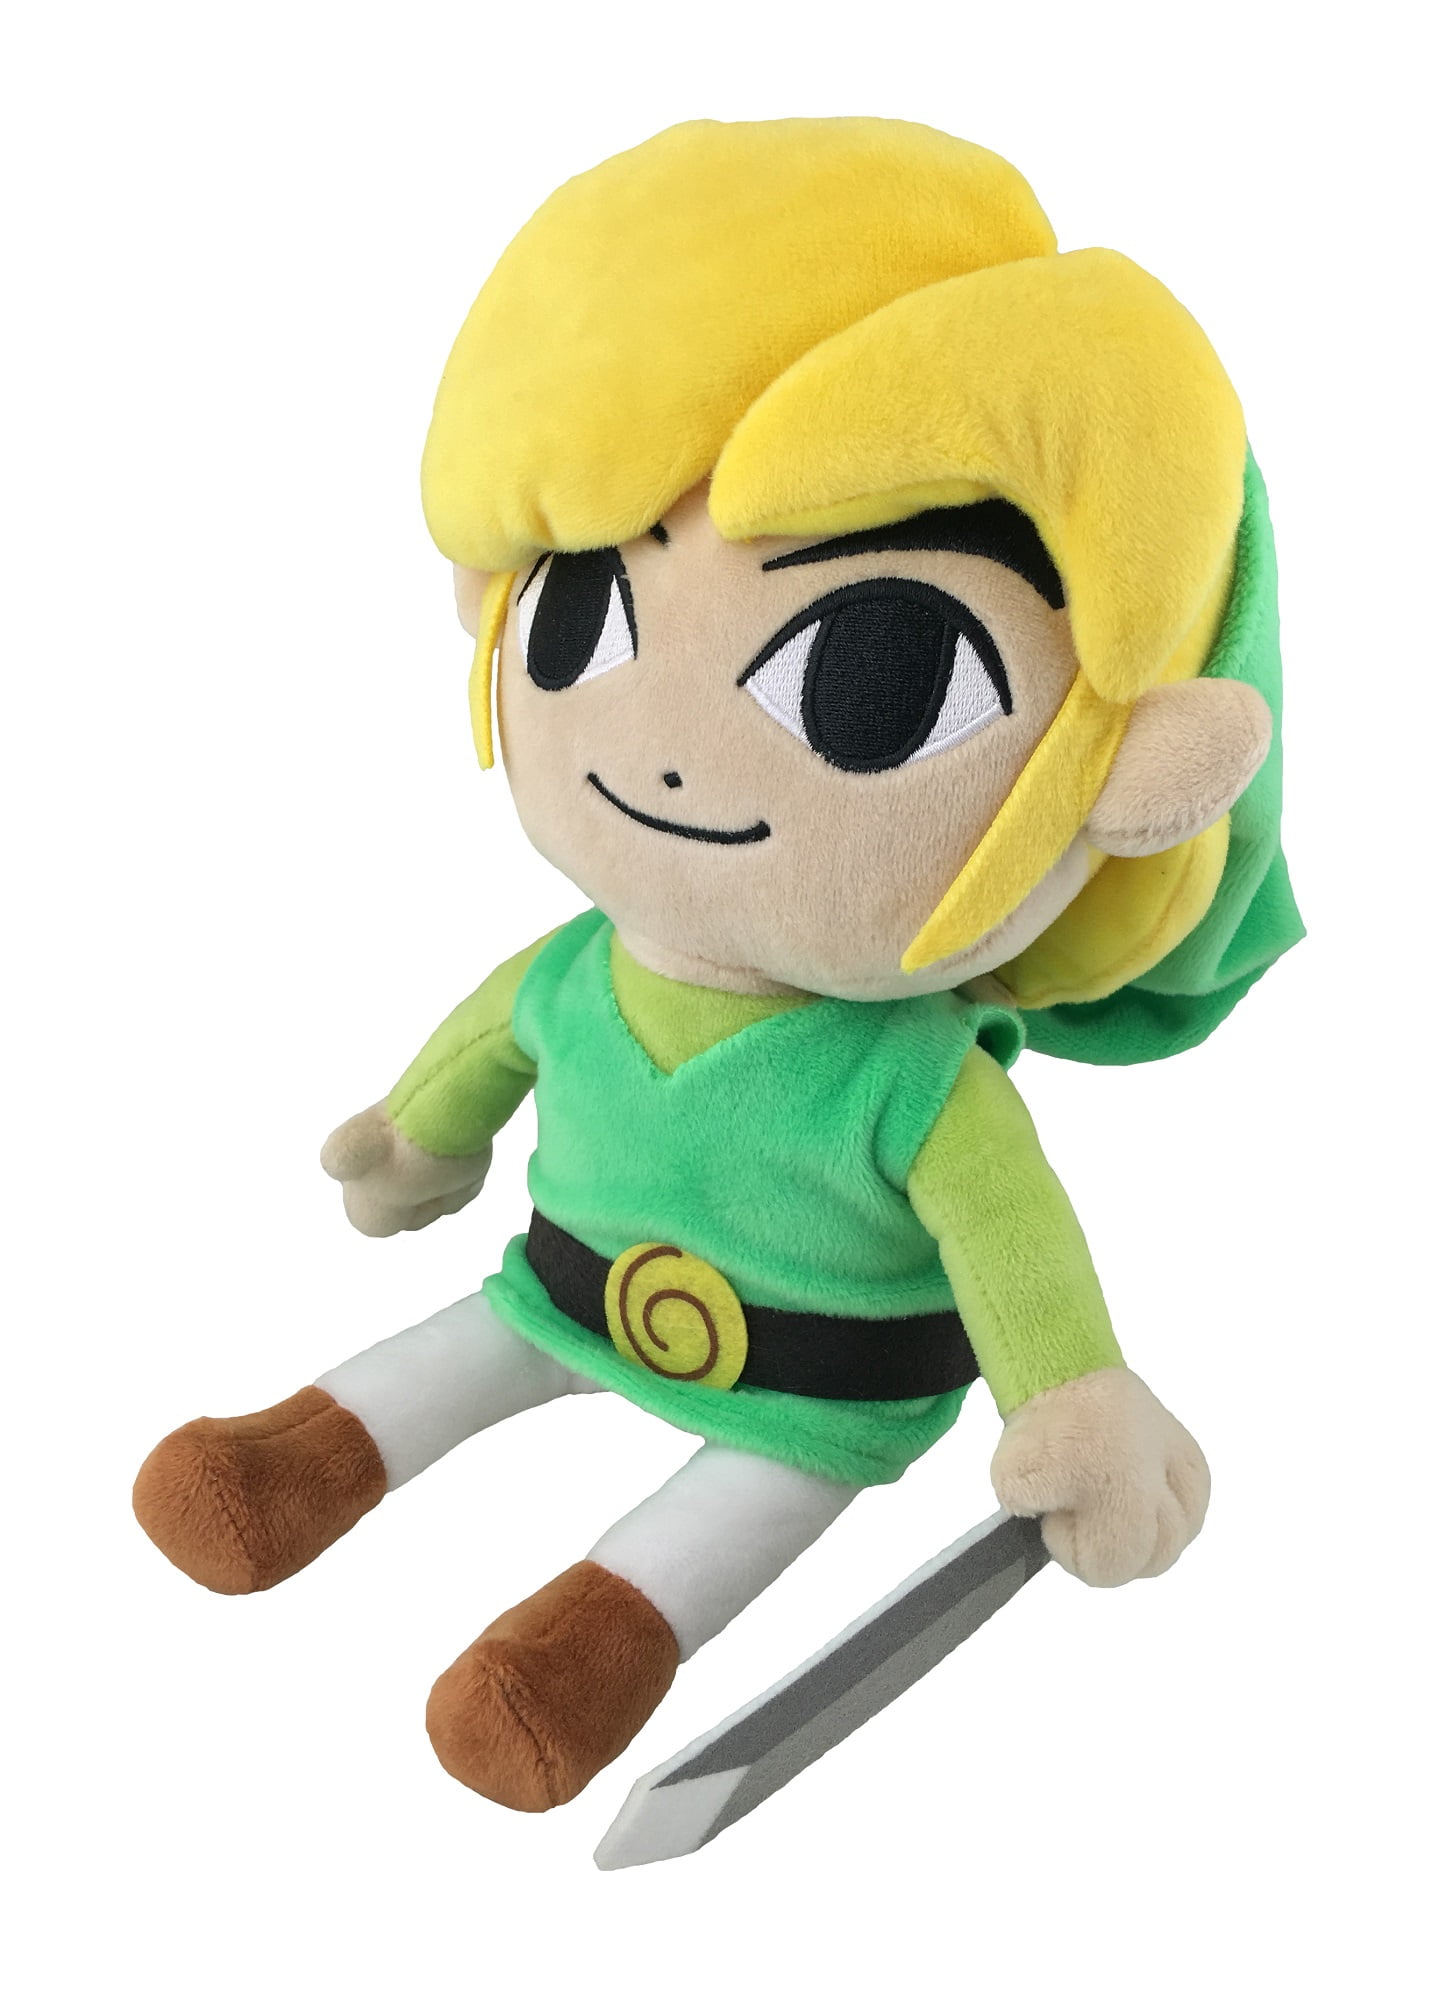 Little Buddy Zelda Breath of The Wild BOTW Link 11" Stuffed Plush Authentic USA for sale online 